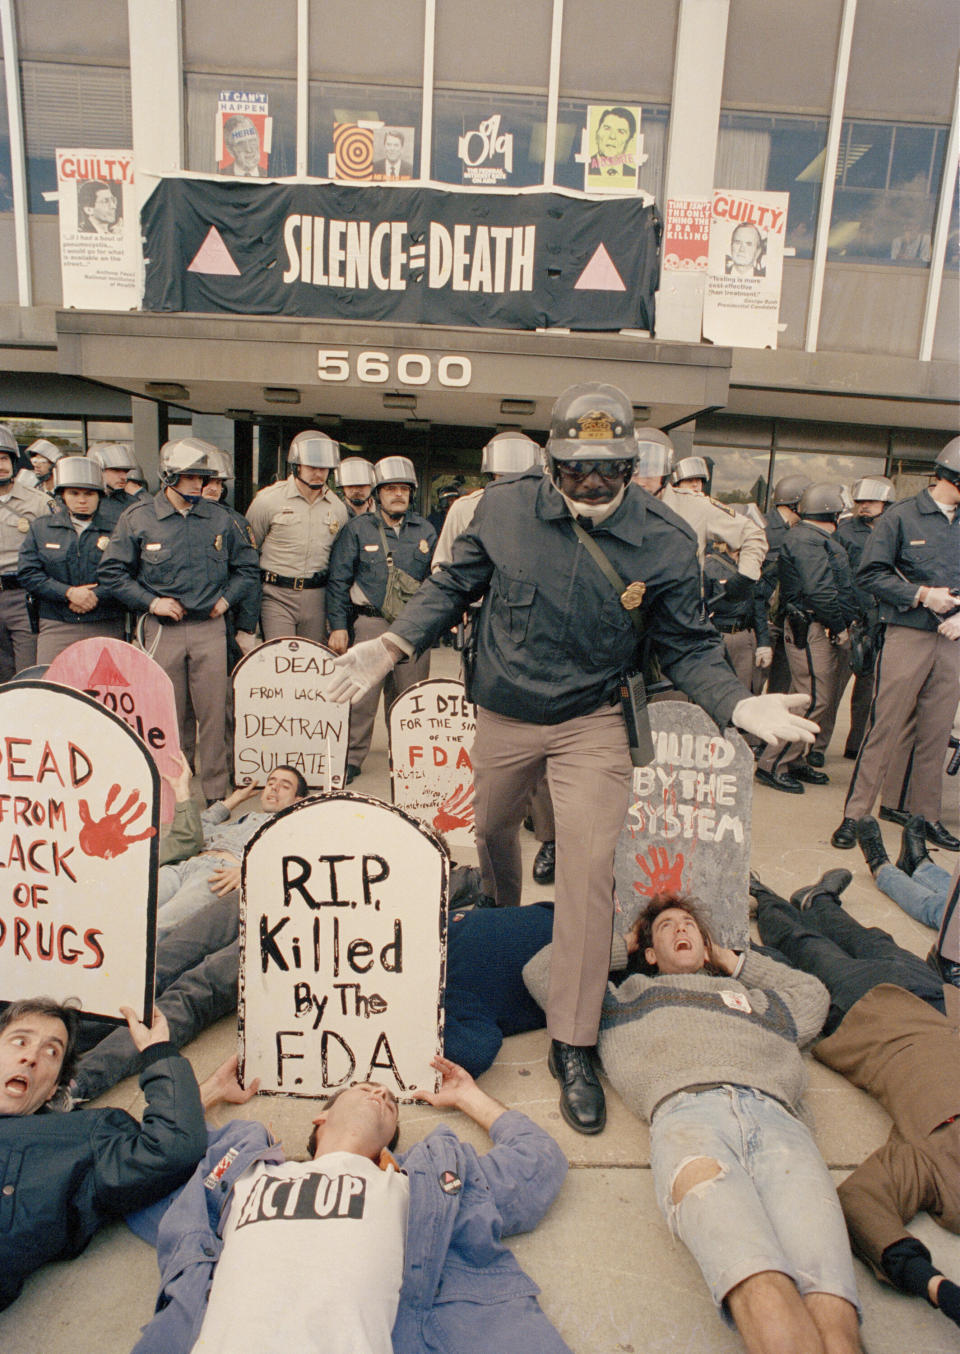 Activist organization ACT UP held protests against the Food and Drug Administration's drug approval processes throughout the 1980s. Some of the shortcuts installed in response to the protests are now being used to develop COVID-19 treatments. (Photo: ASSOCIATED PRESS)